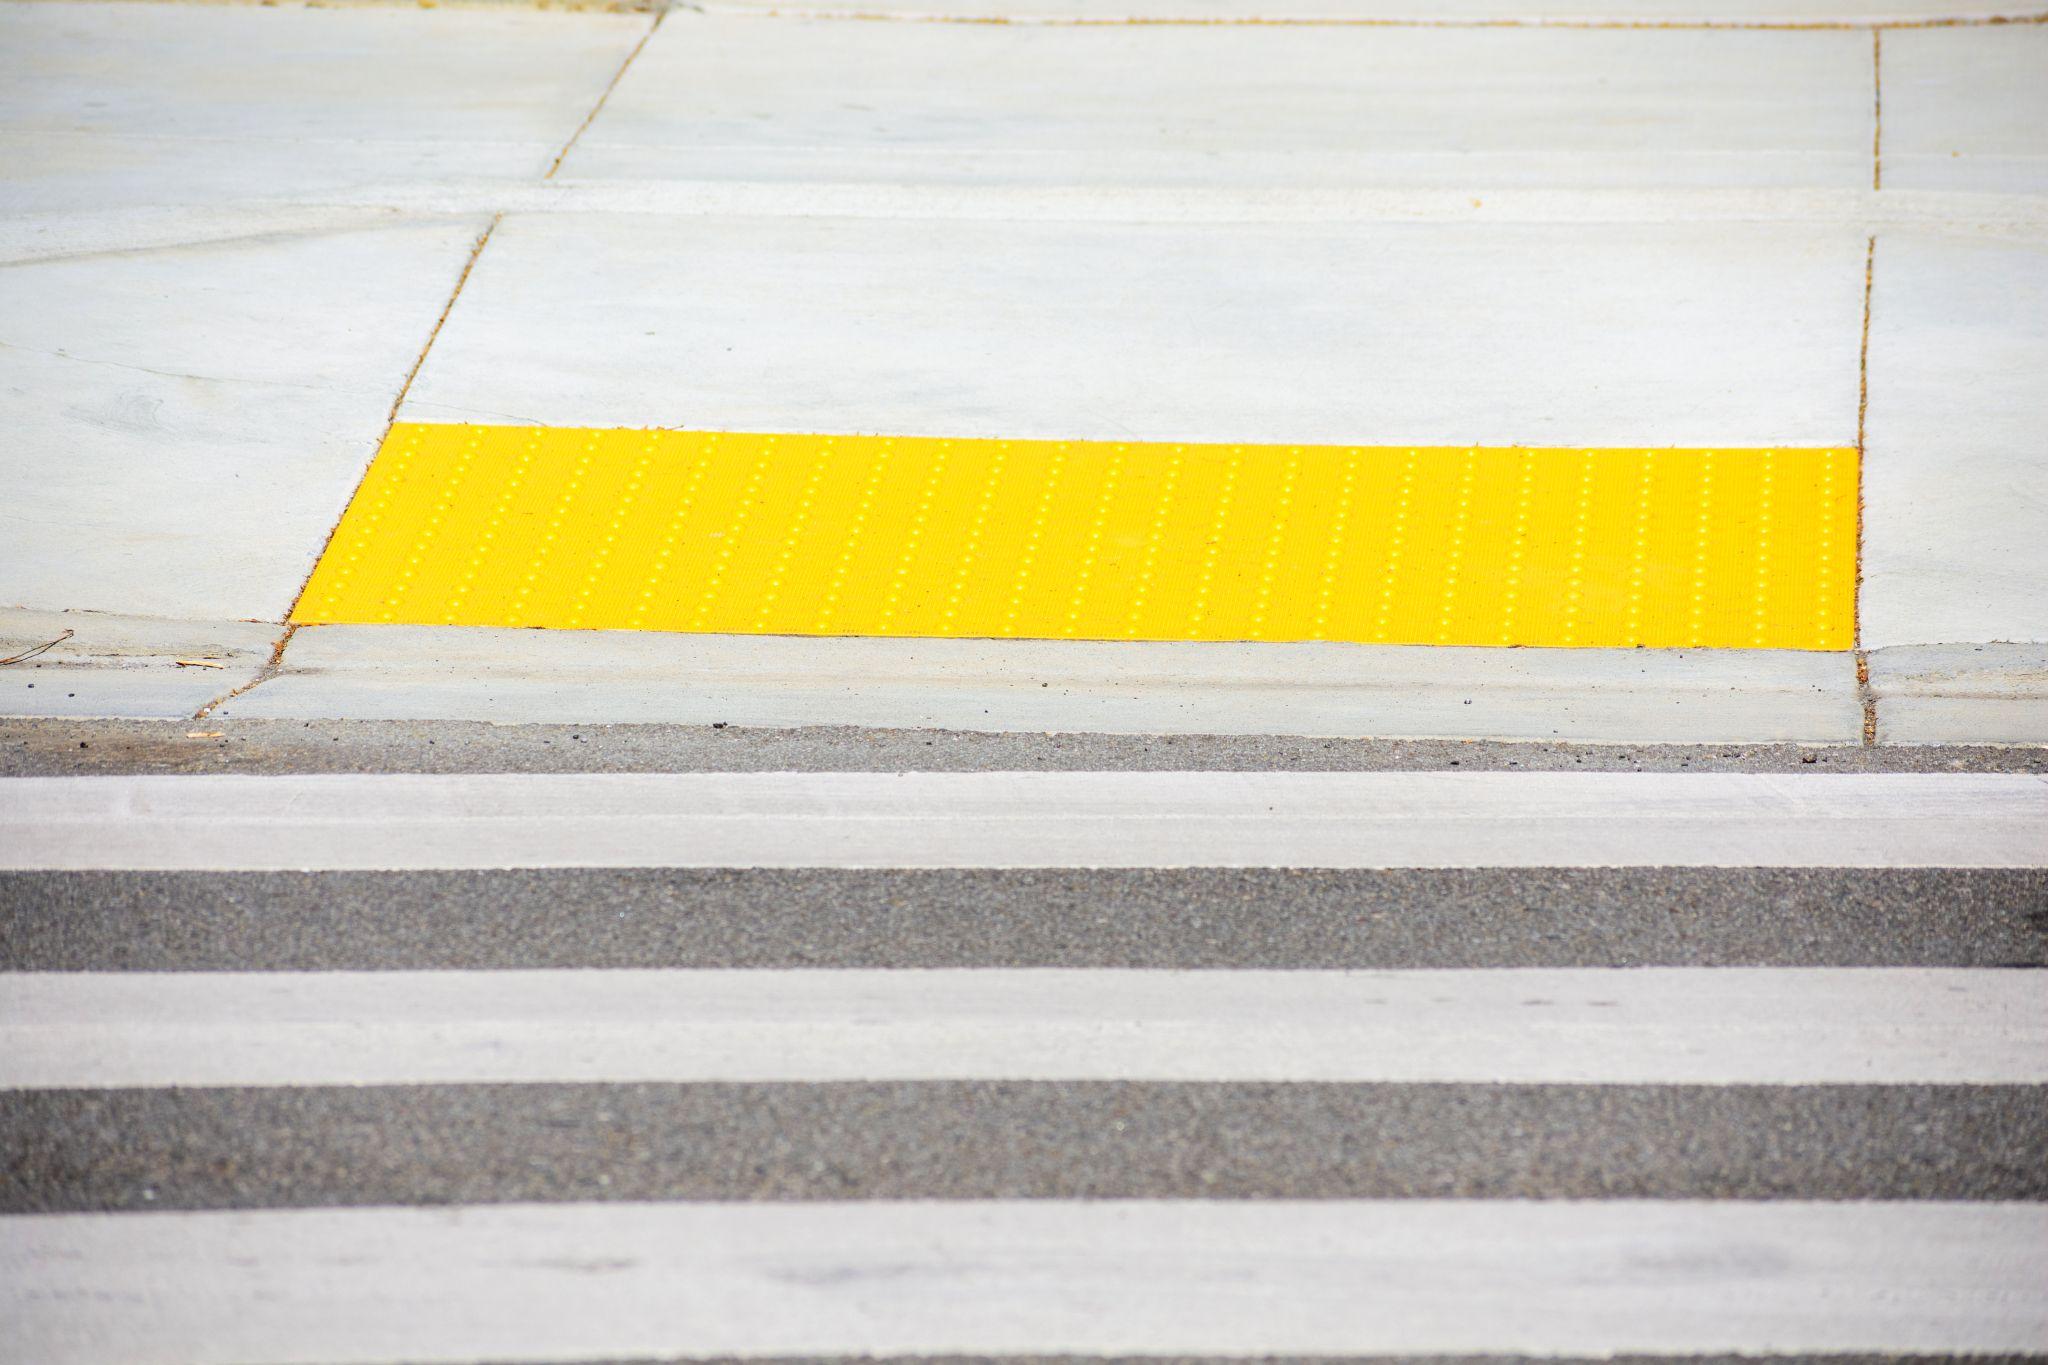 Pedestrian crossing leads to yellow detectable warning surface tactile paving.